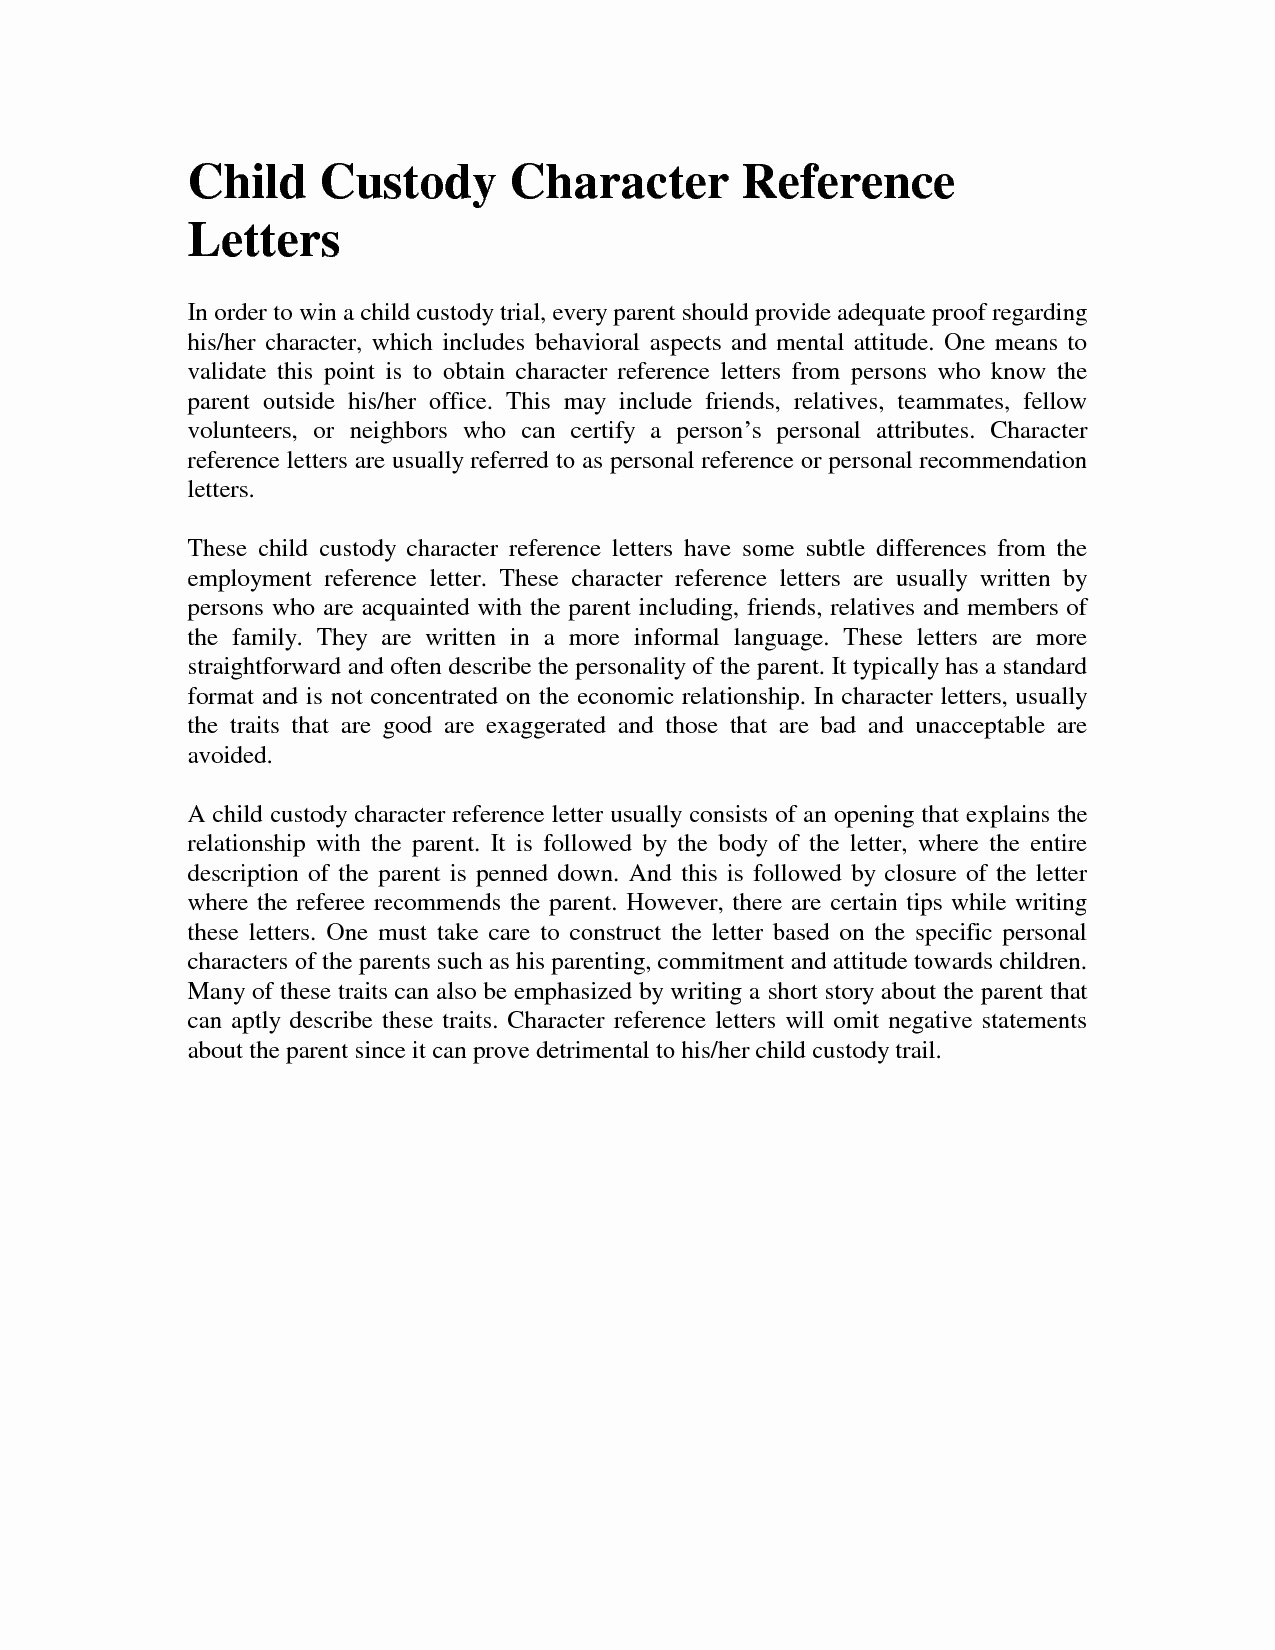 character reference letter for court child custody template